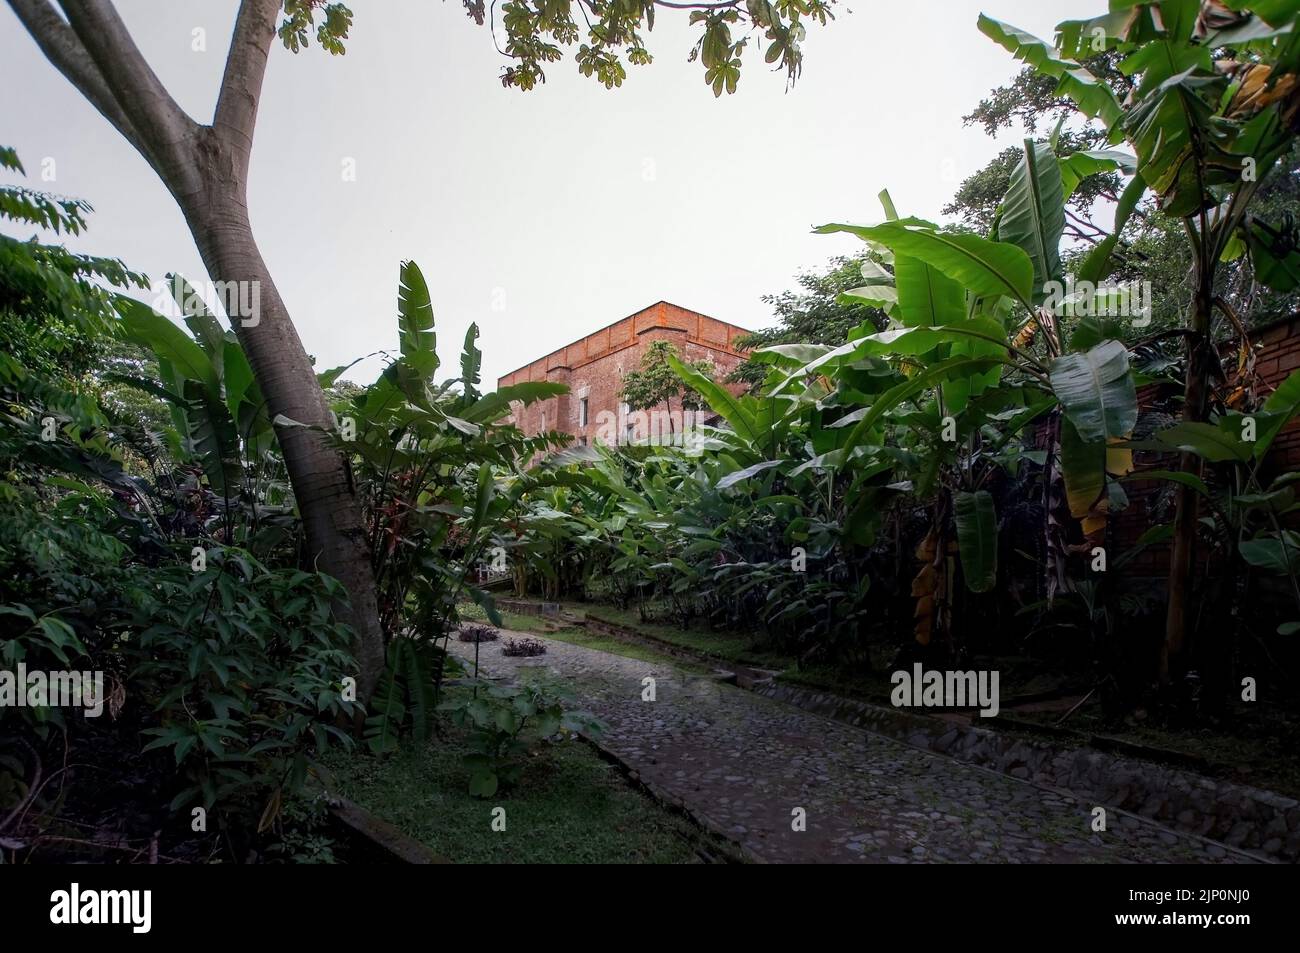 building is seen through vegetation, especially banana palm, the building is made of natural red brick Stock Photo